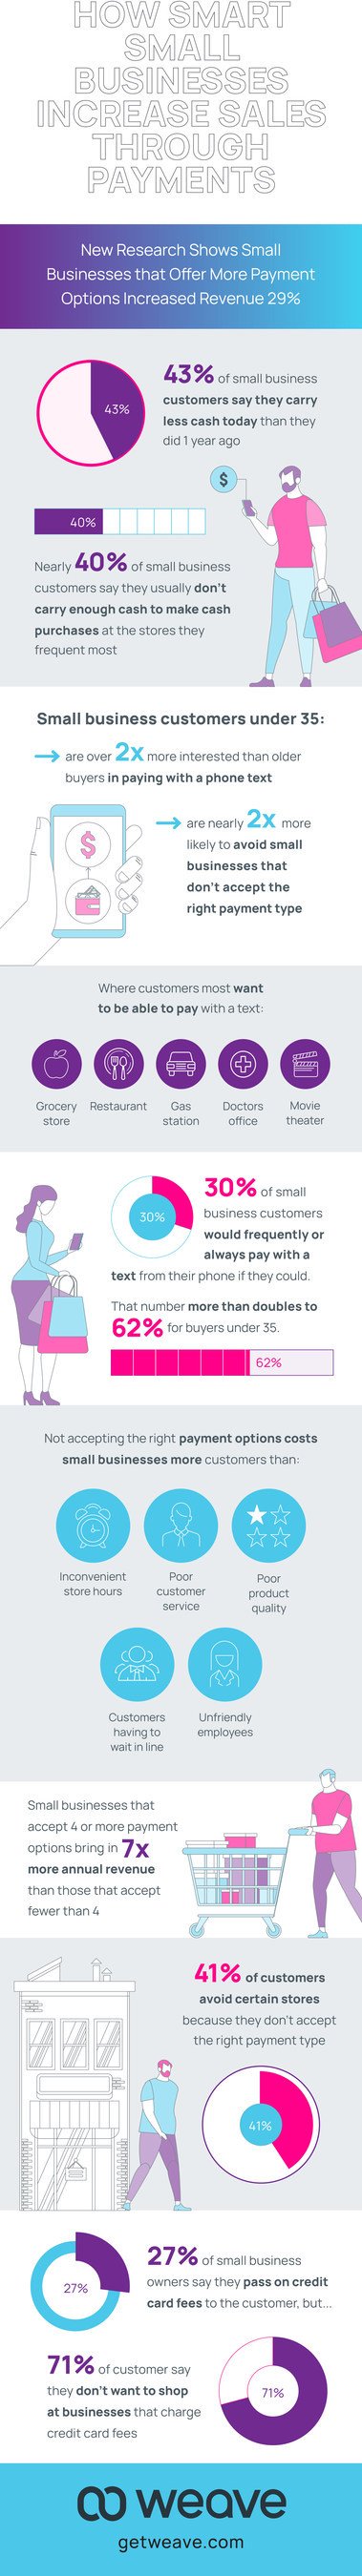 35% of Customers Will Use SMS Payments but Only 4% of Small Businesses Offer Option